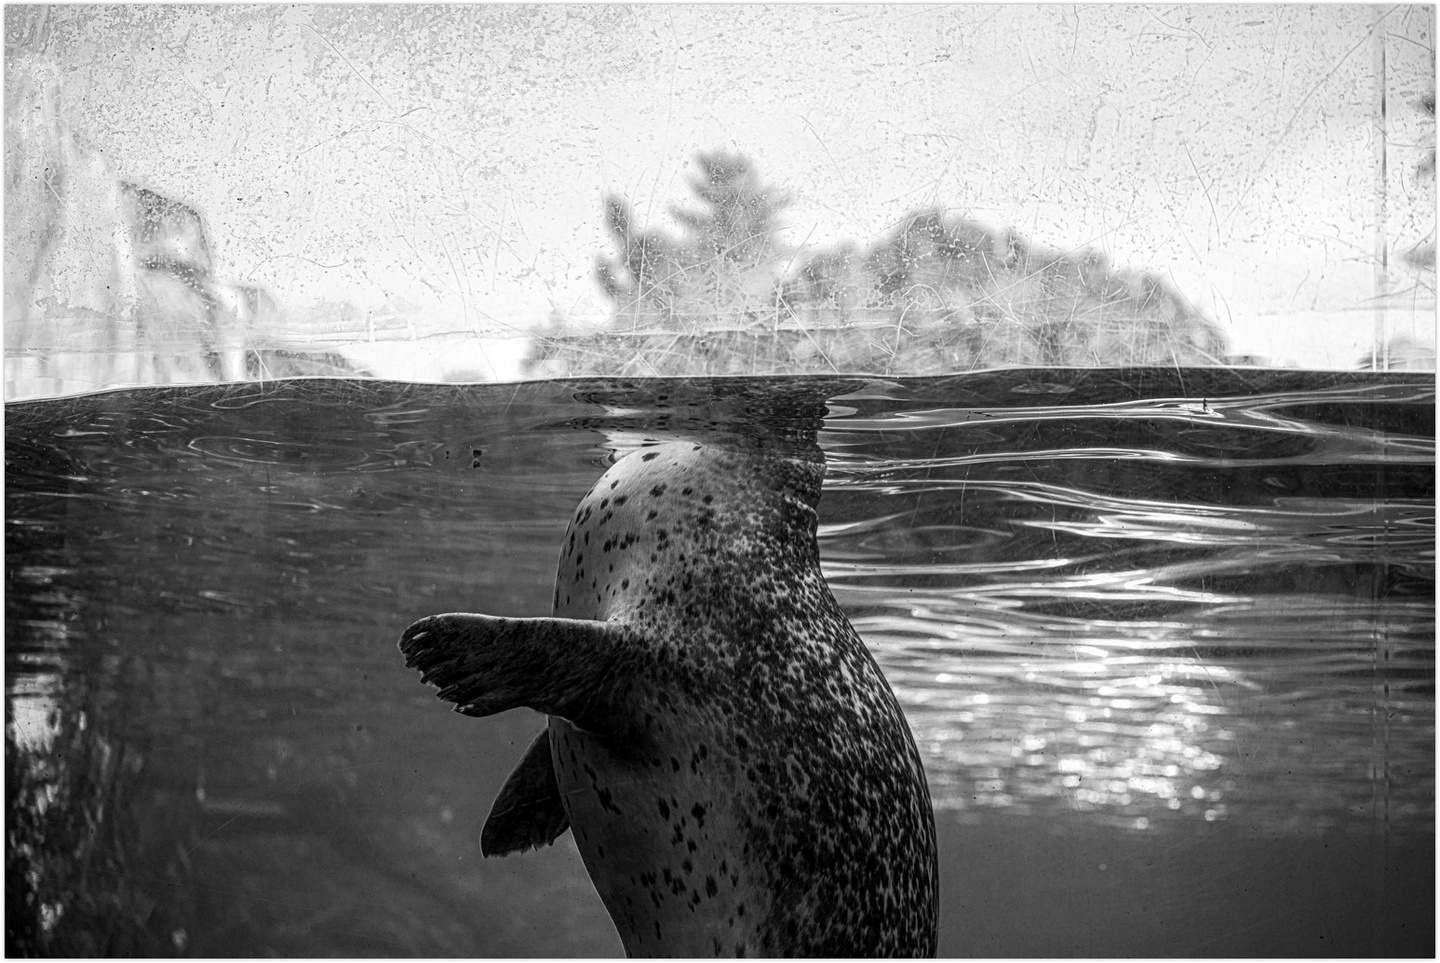 Black and white photo through a transparent glass of a seal floating in water. We are only able to see its body from this angle.